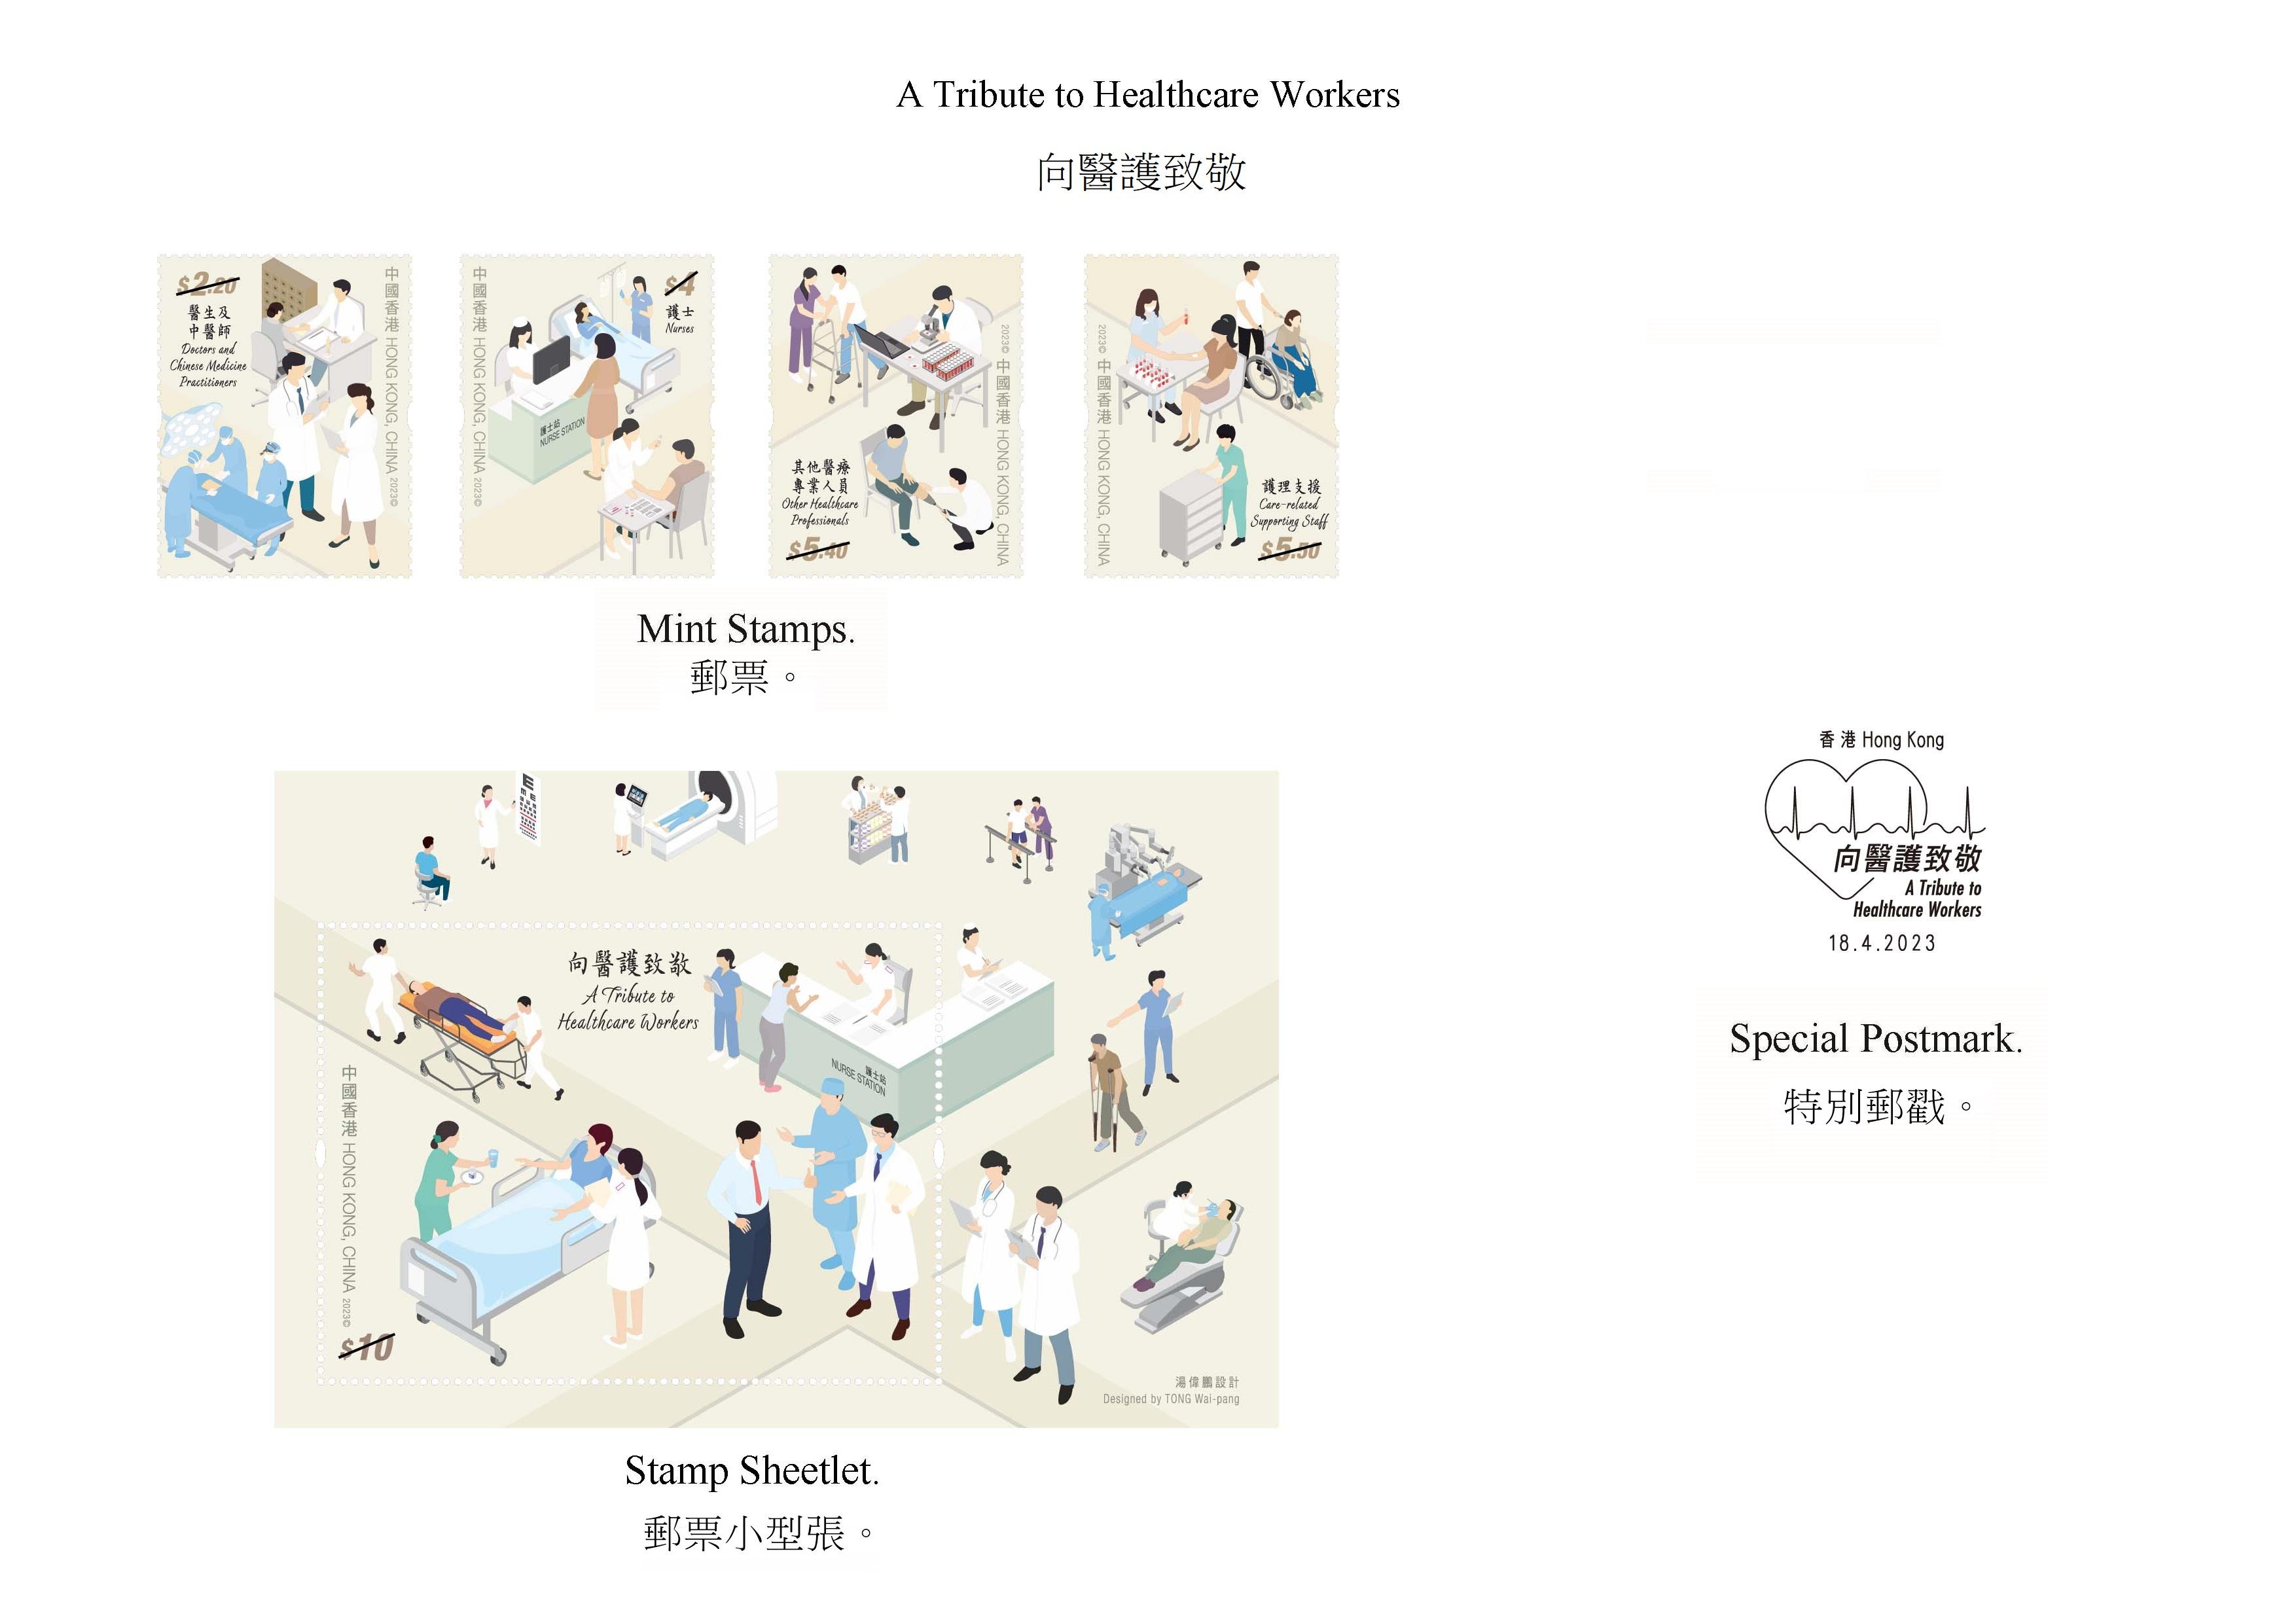 Hongkong Post will launch a special stamp issue and associated philatelic products on the theme of "A Tribute to Healthcare Workers" on April 18 (Tuesday). Photo shows the mint stamps, the stamp sheetlet and the special postmark.
